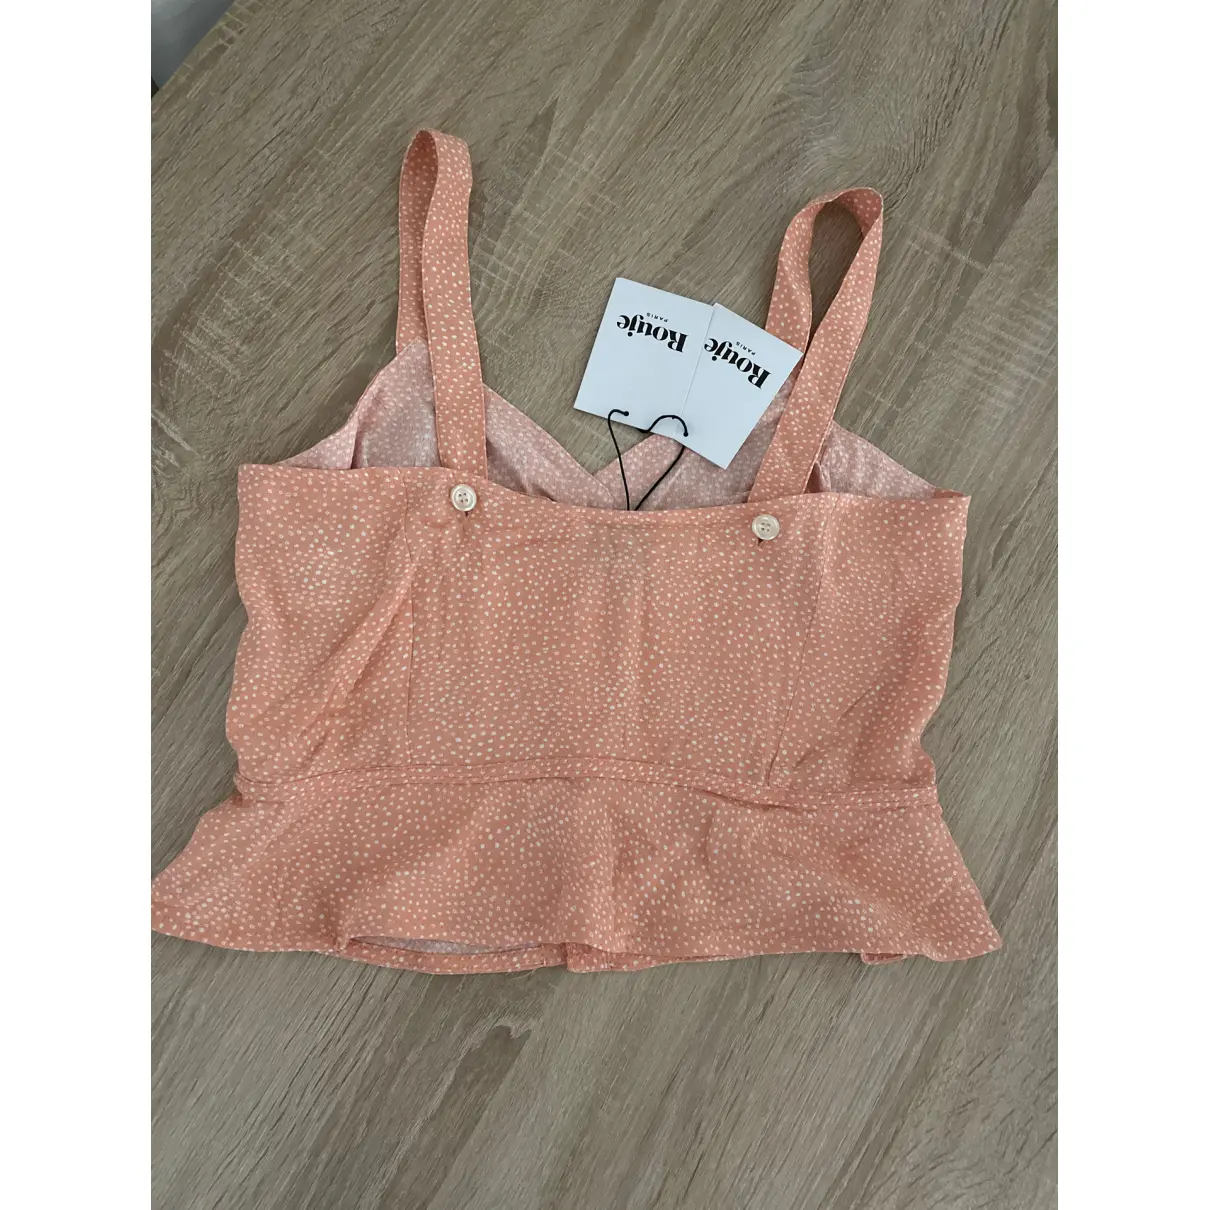 Buy Rouje Spring Summer 2020 camisole online